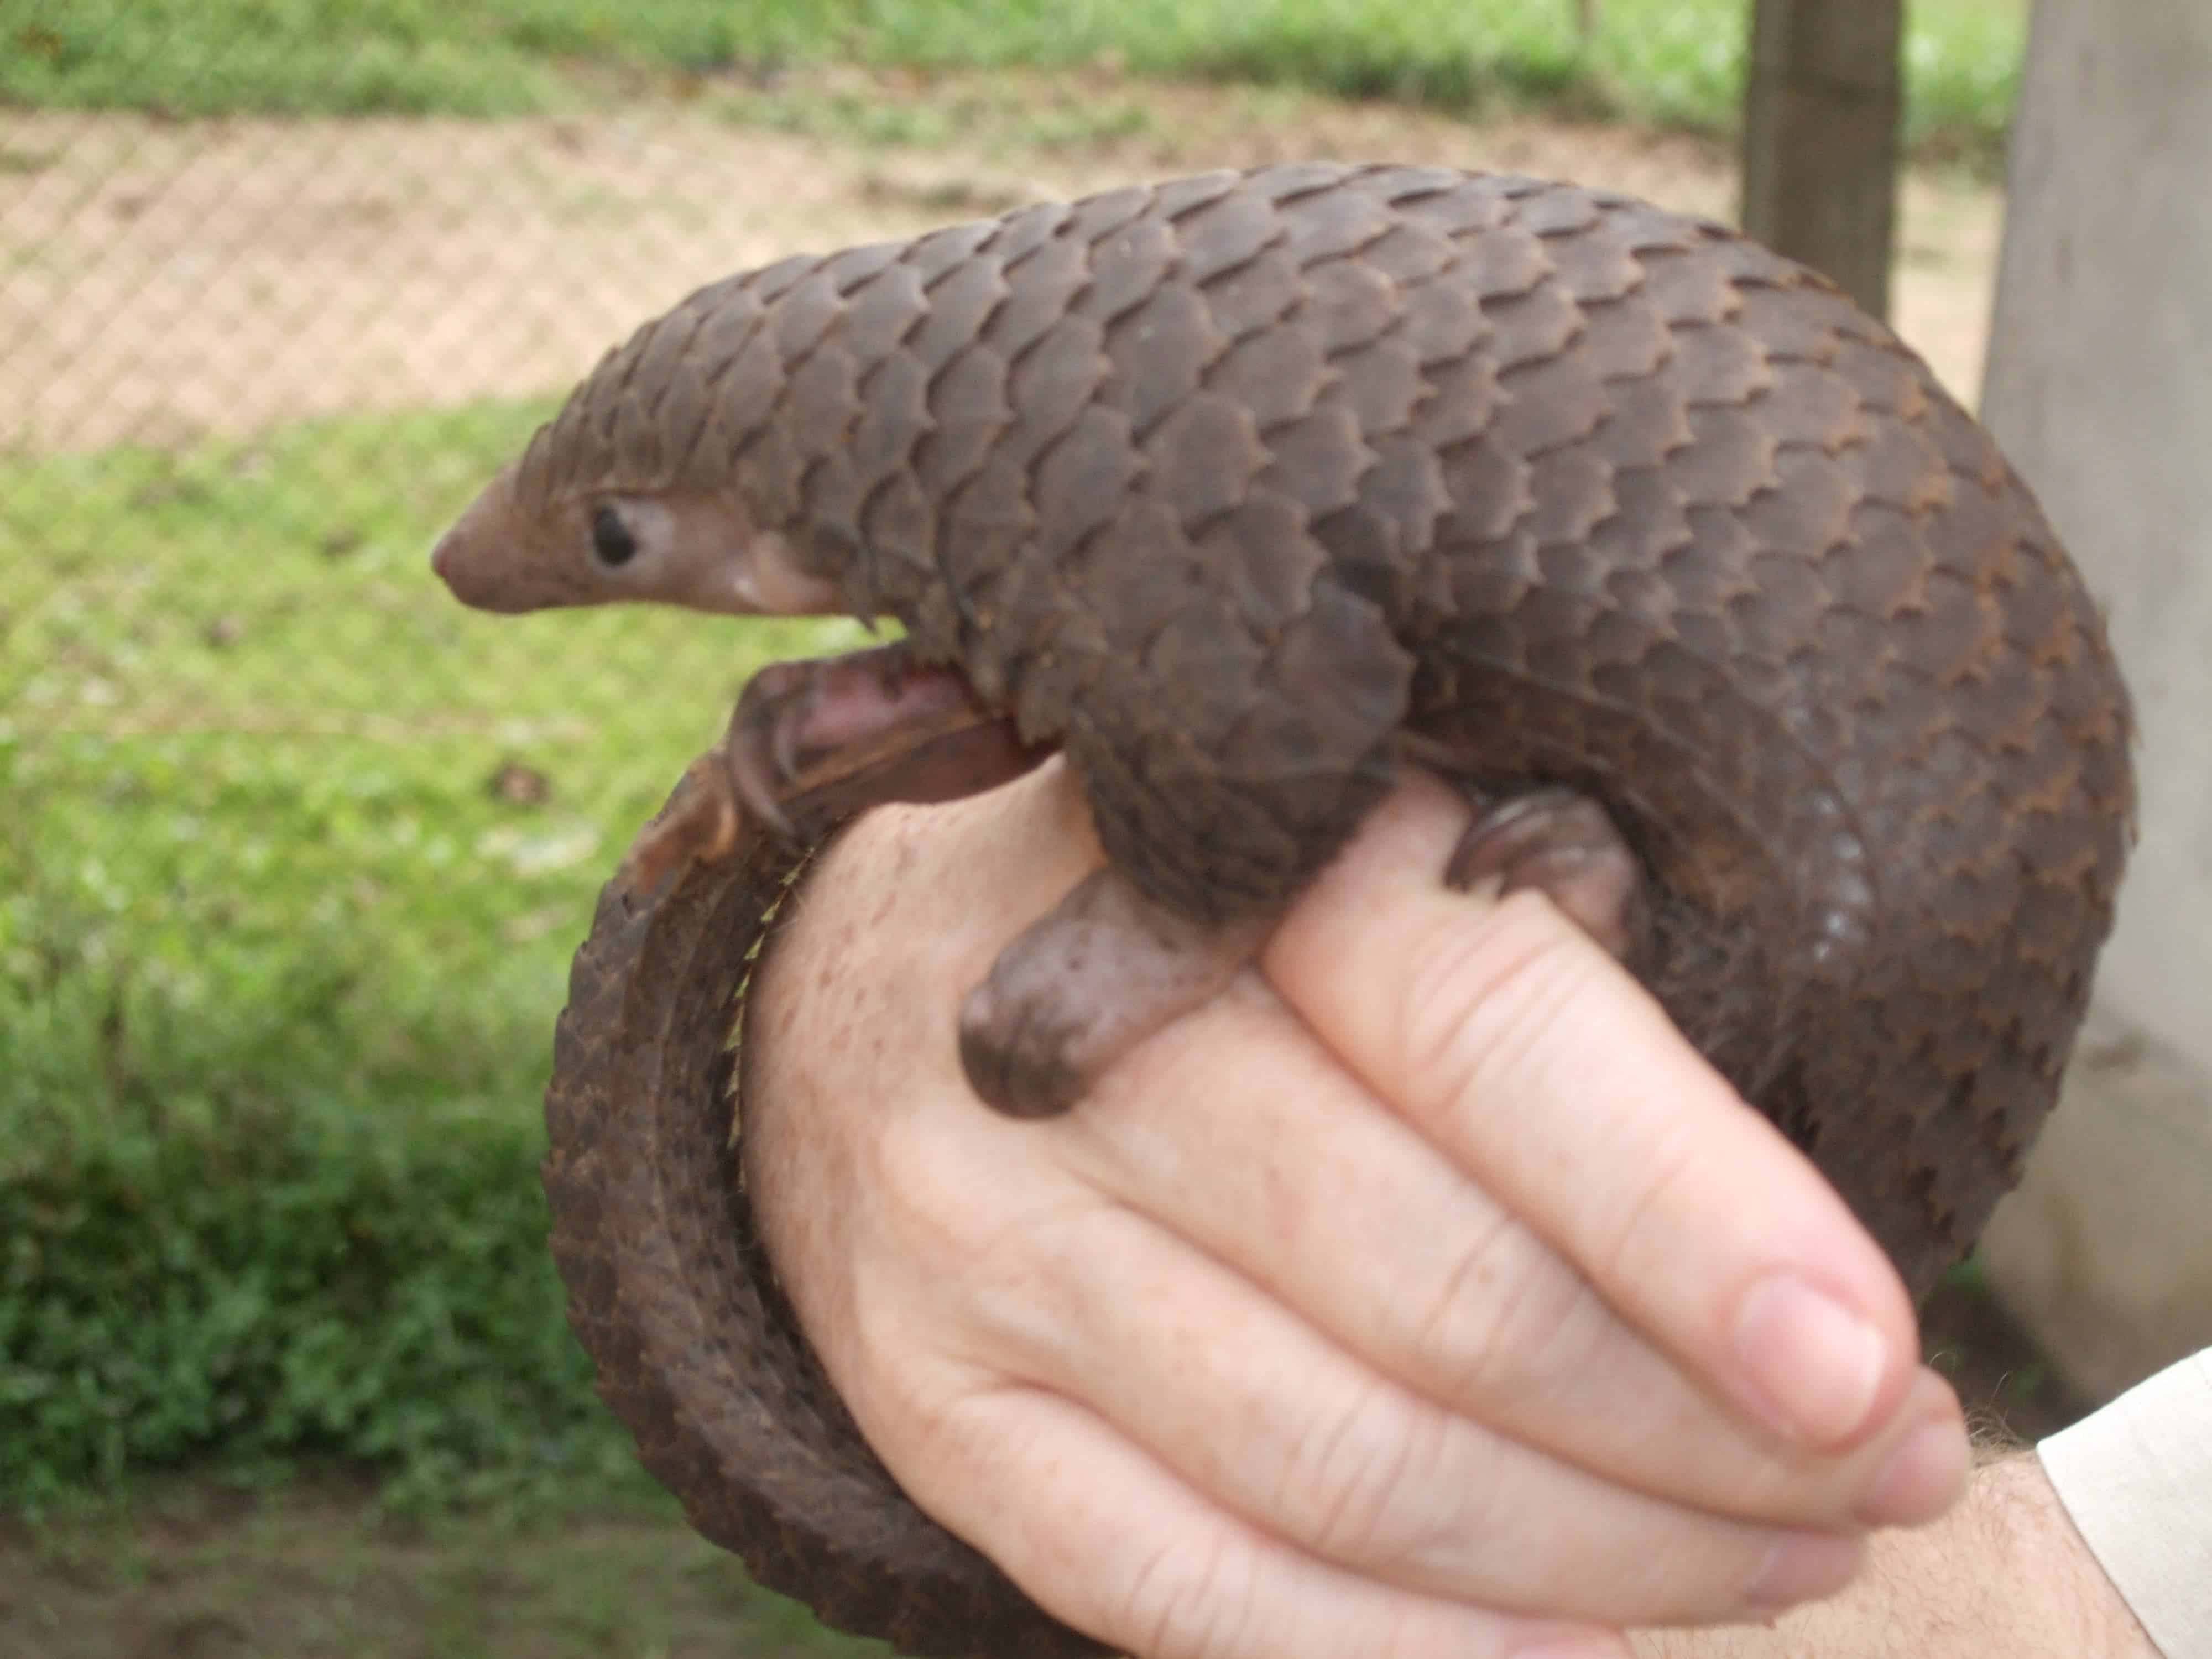 Pangolins are often killed for their meat, which is considered a delicacy. Credit: Wikimedia Common